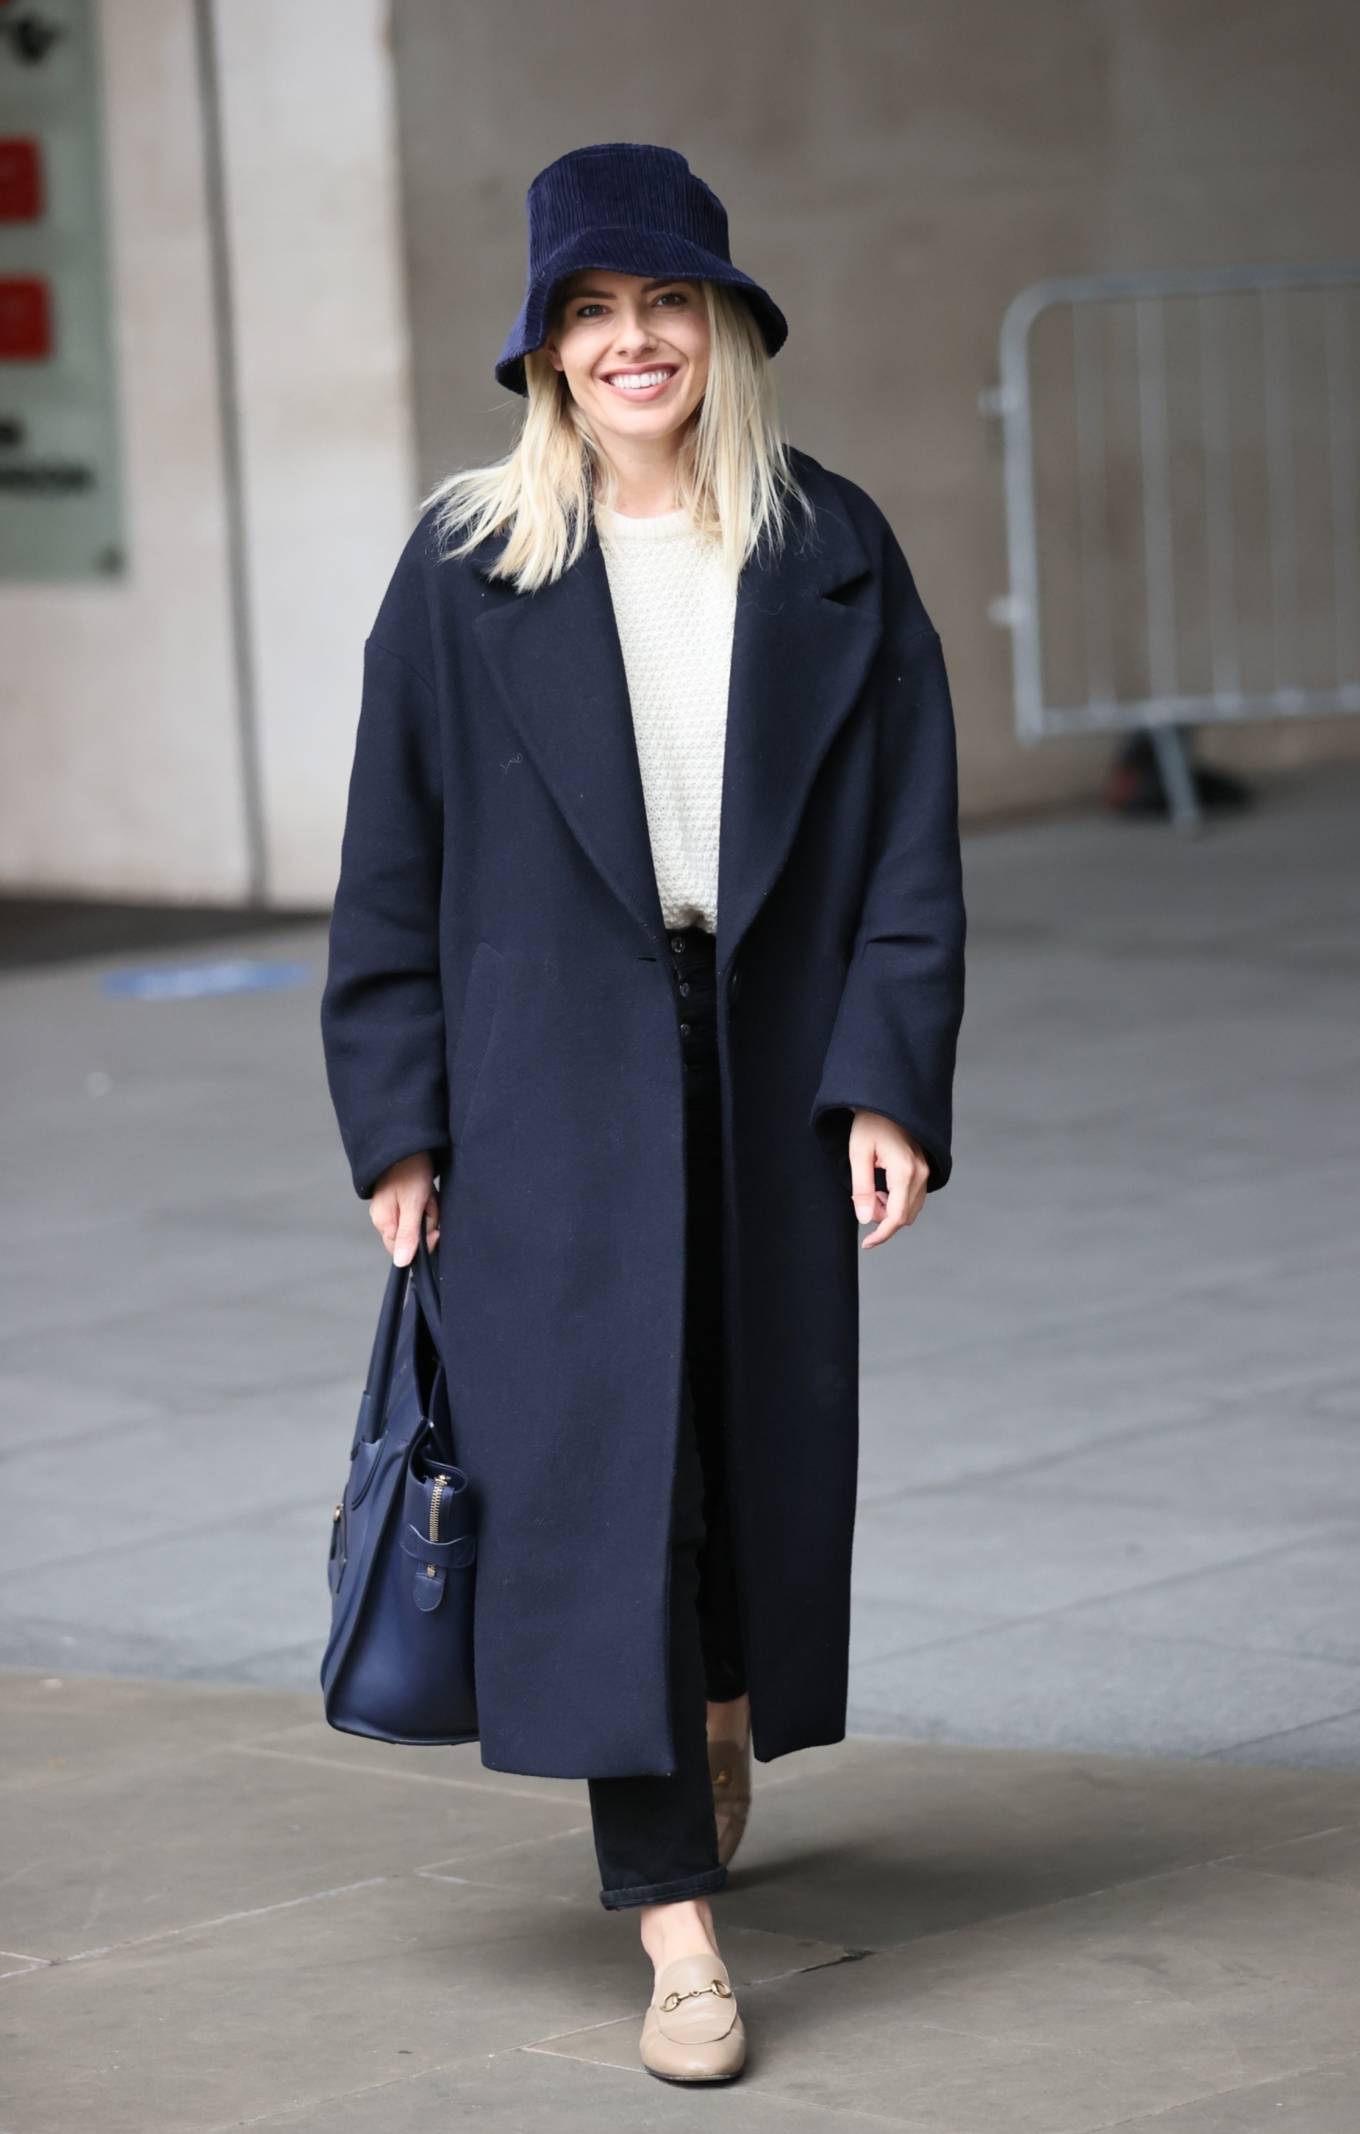 Mollie King 2020 : Mollie King – Wearing smart denim and stylish blue hat at BBC studios in London-06